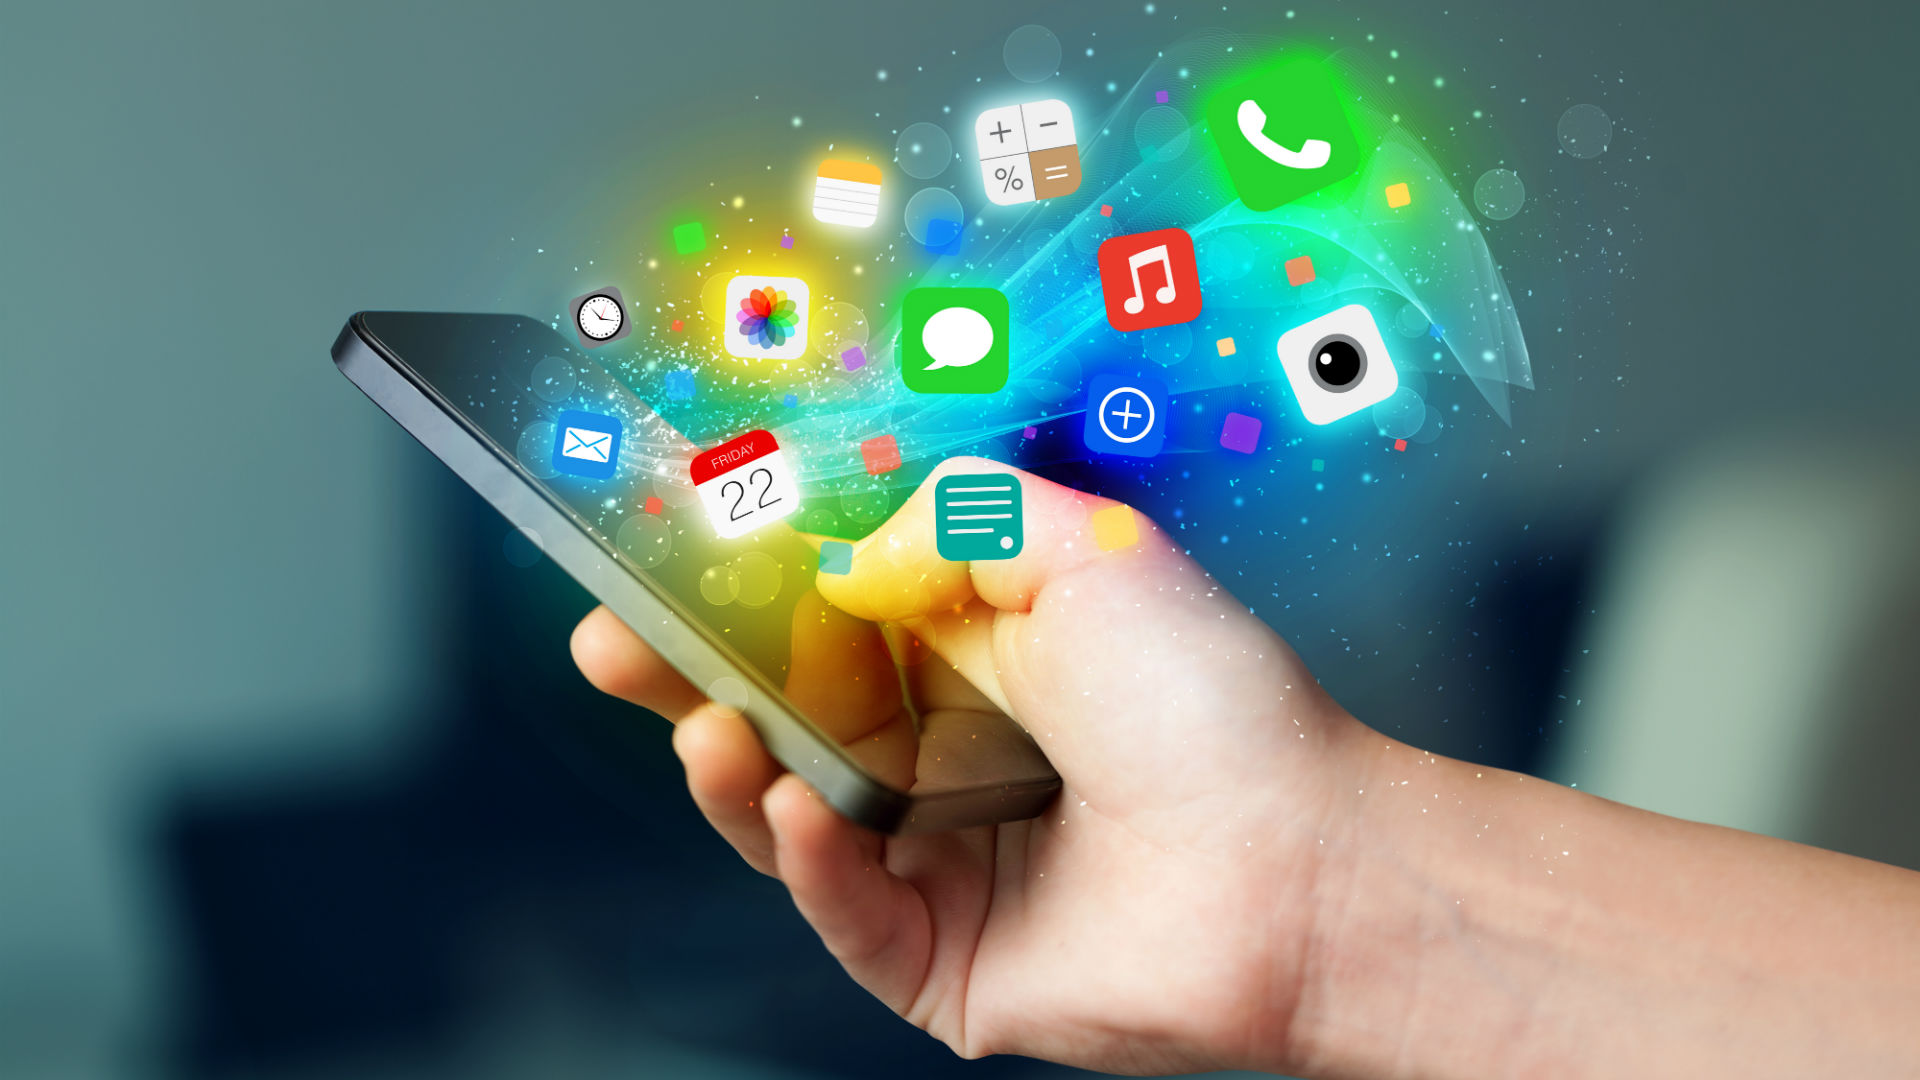 The next generation of apps - what can you expect?